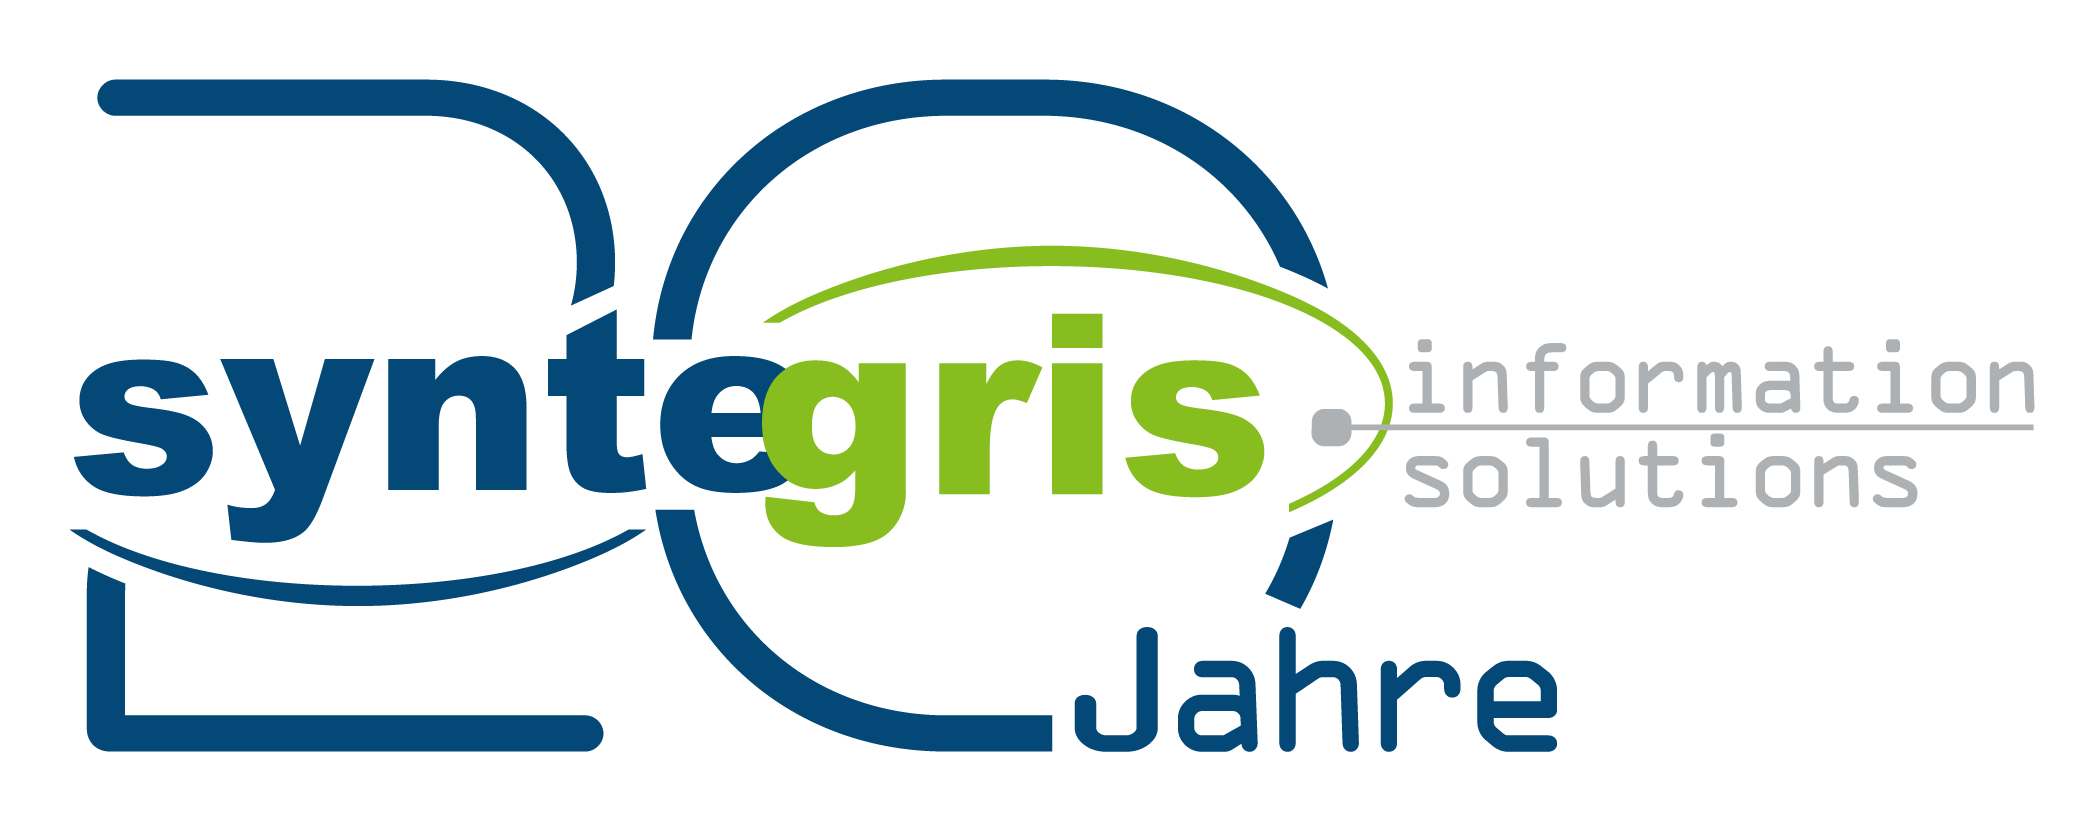 syntegris information solutions GmbH